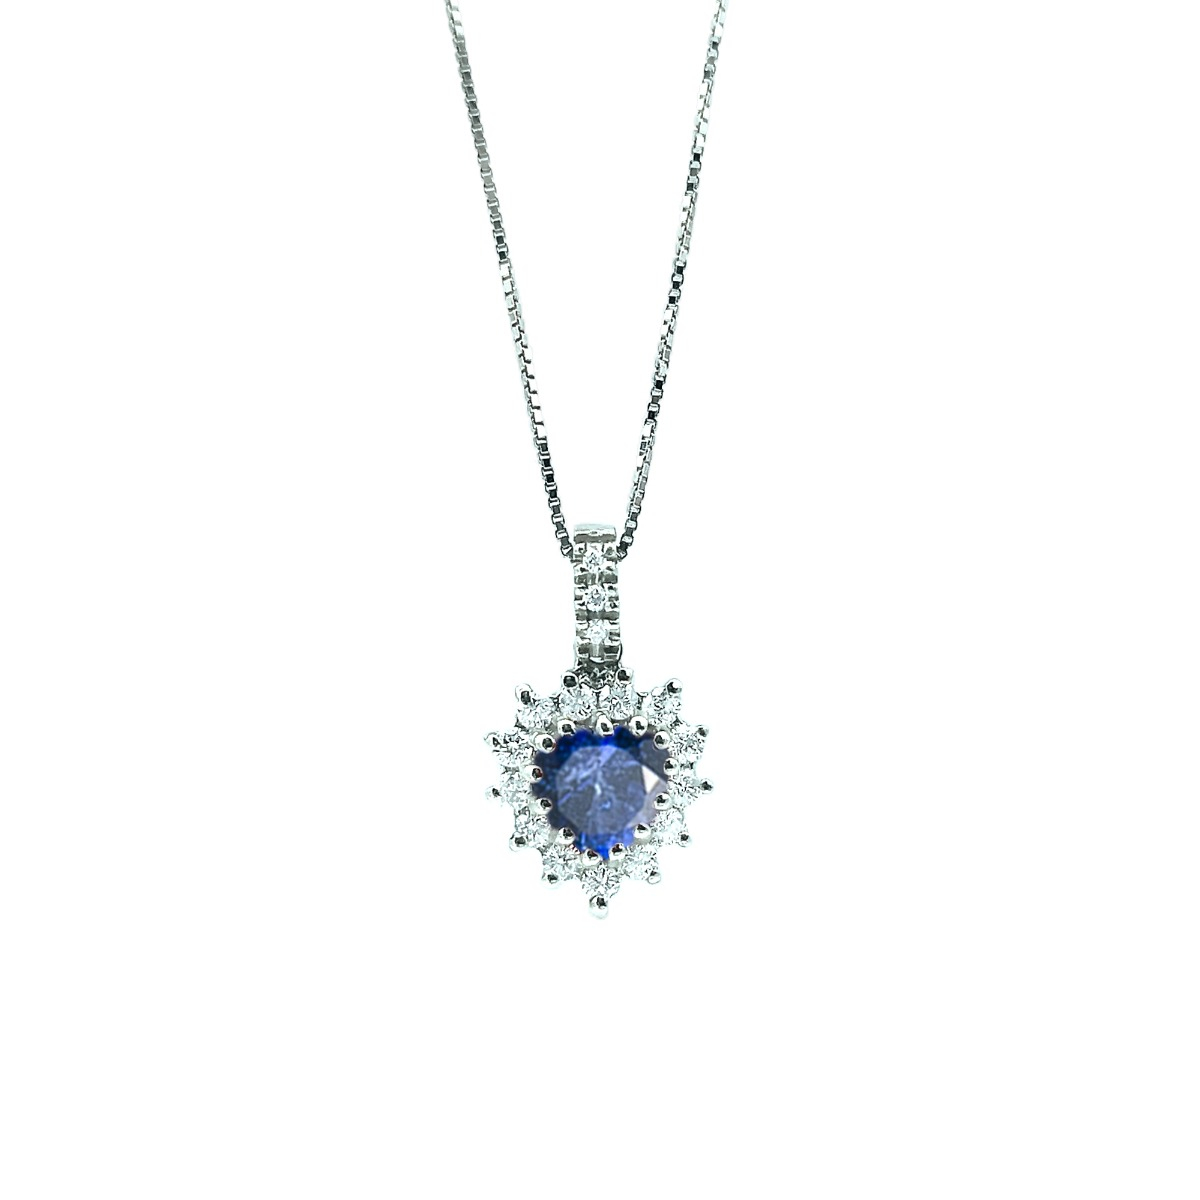 Elegant Necklace In White Gold And Diamonds With Heart-Shaped Sapphire